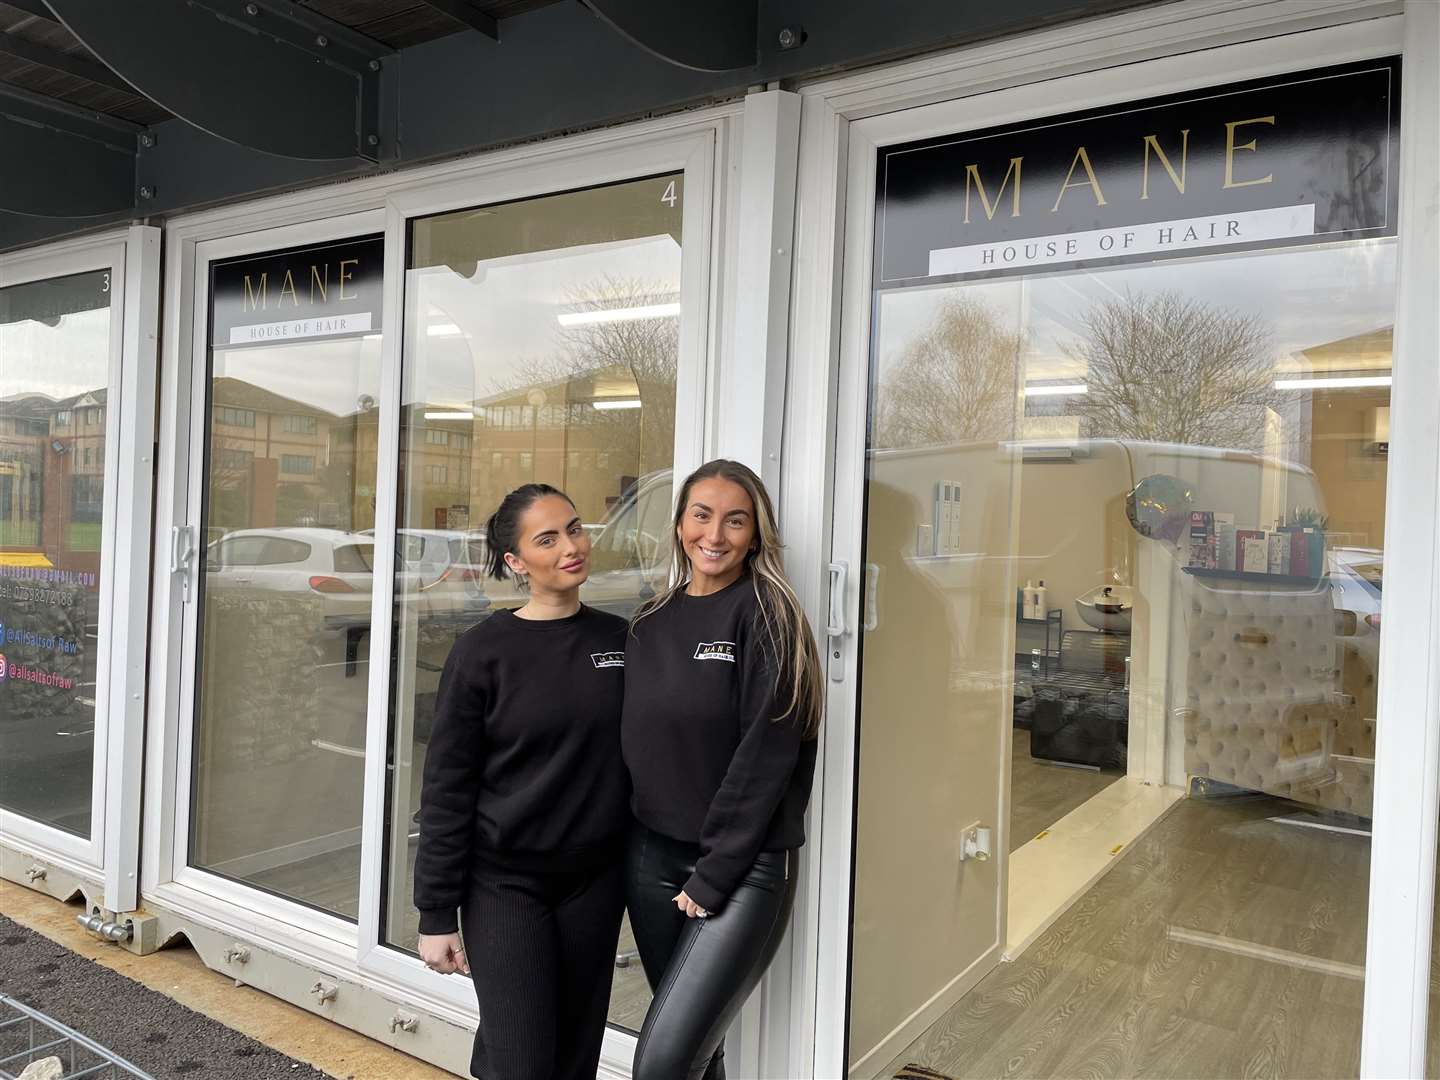 From left: Paige and Emily have said opening the shop was the "best decision"